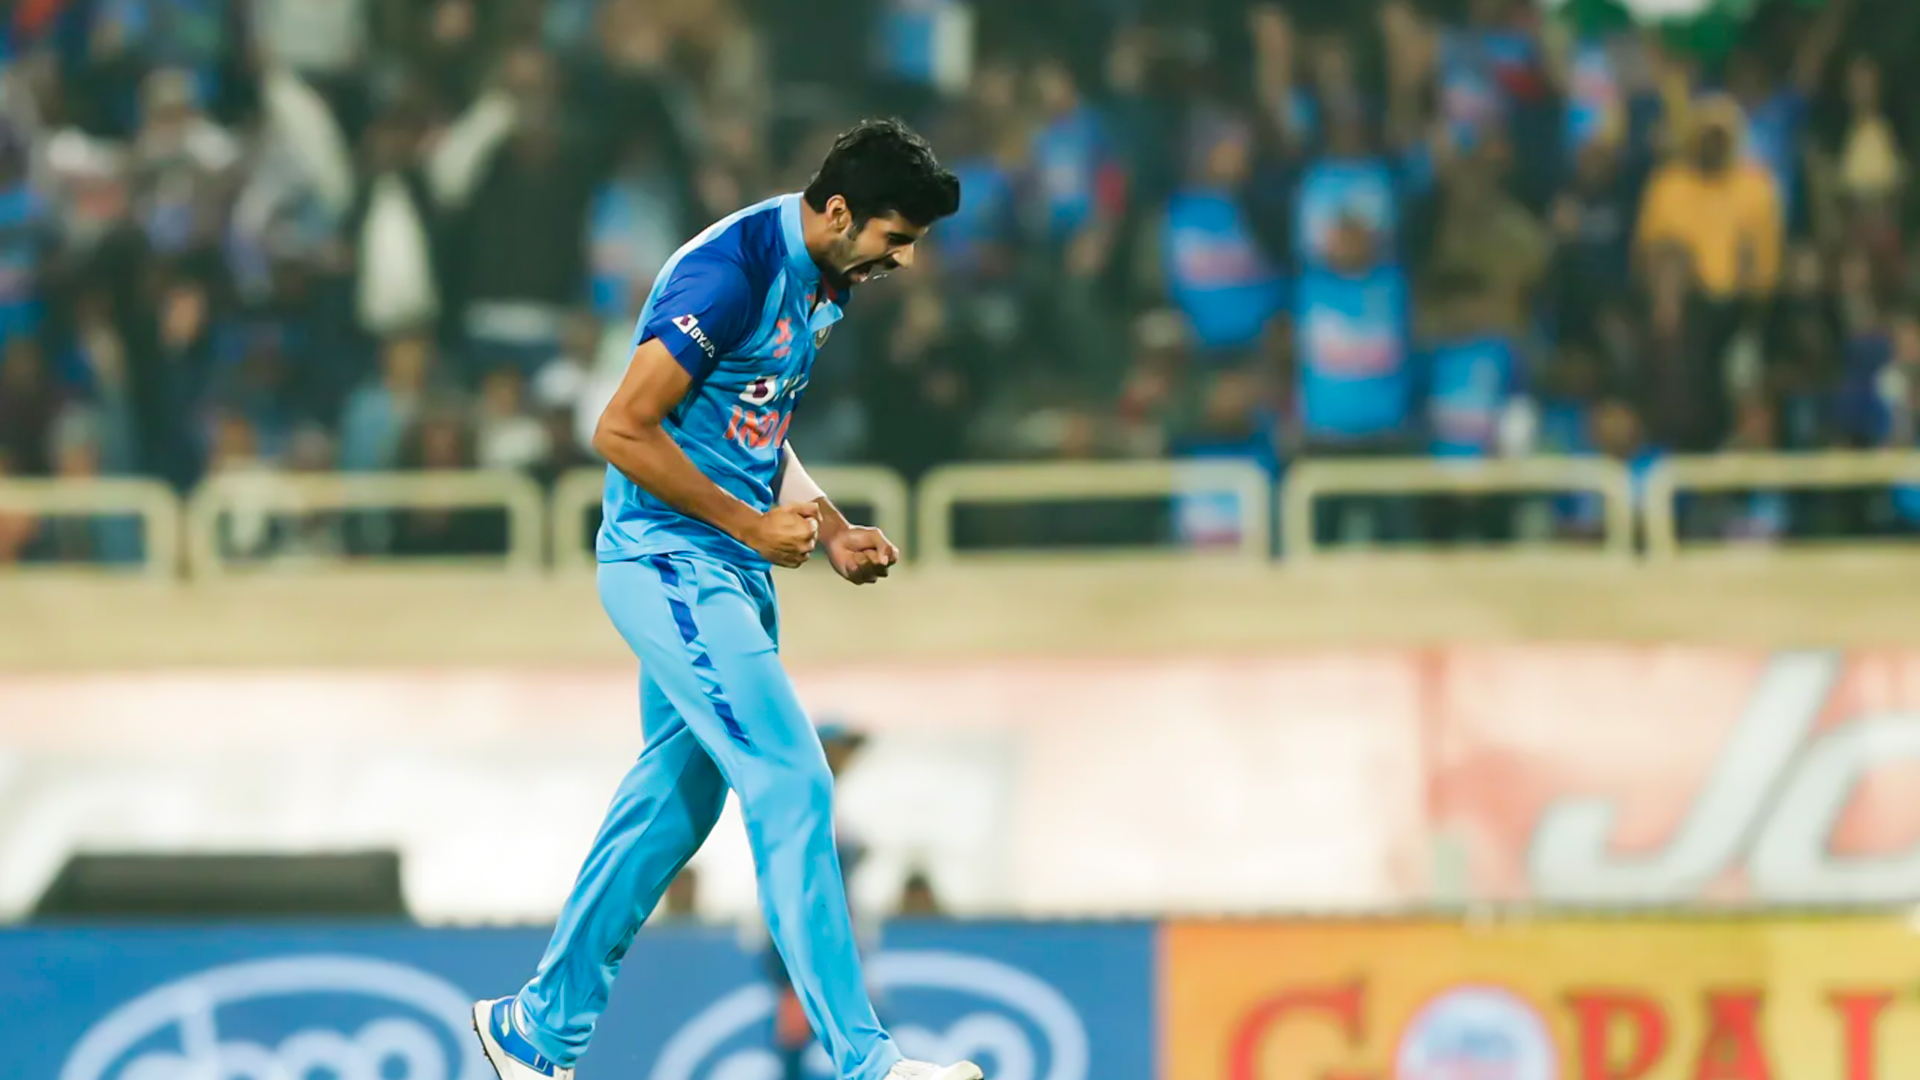 Watch Video: Flying Washington Sundar Makes An Incredible One-Handed Catch